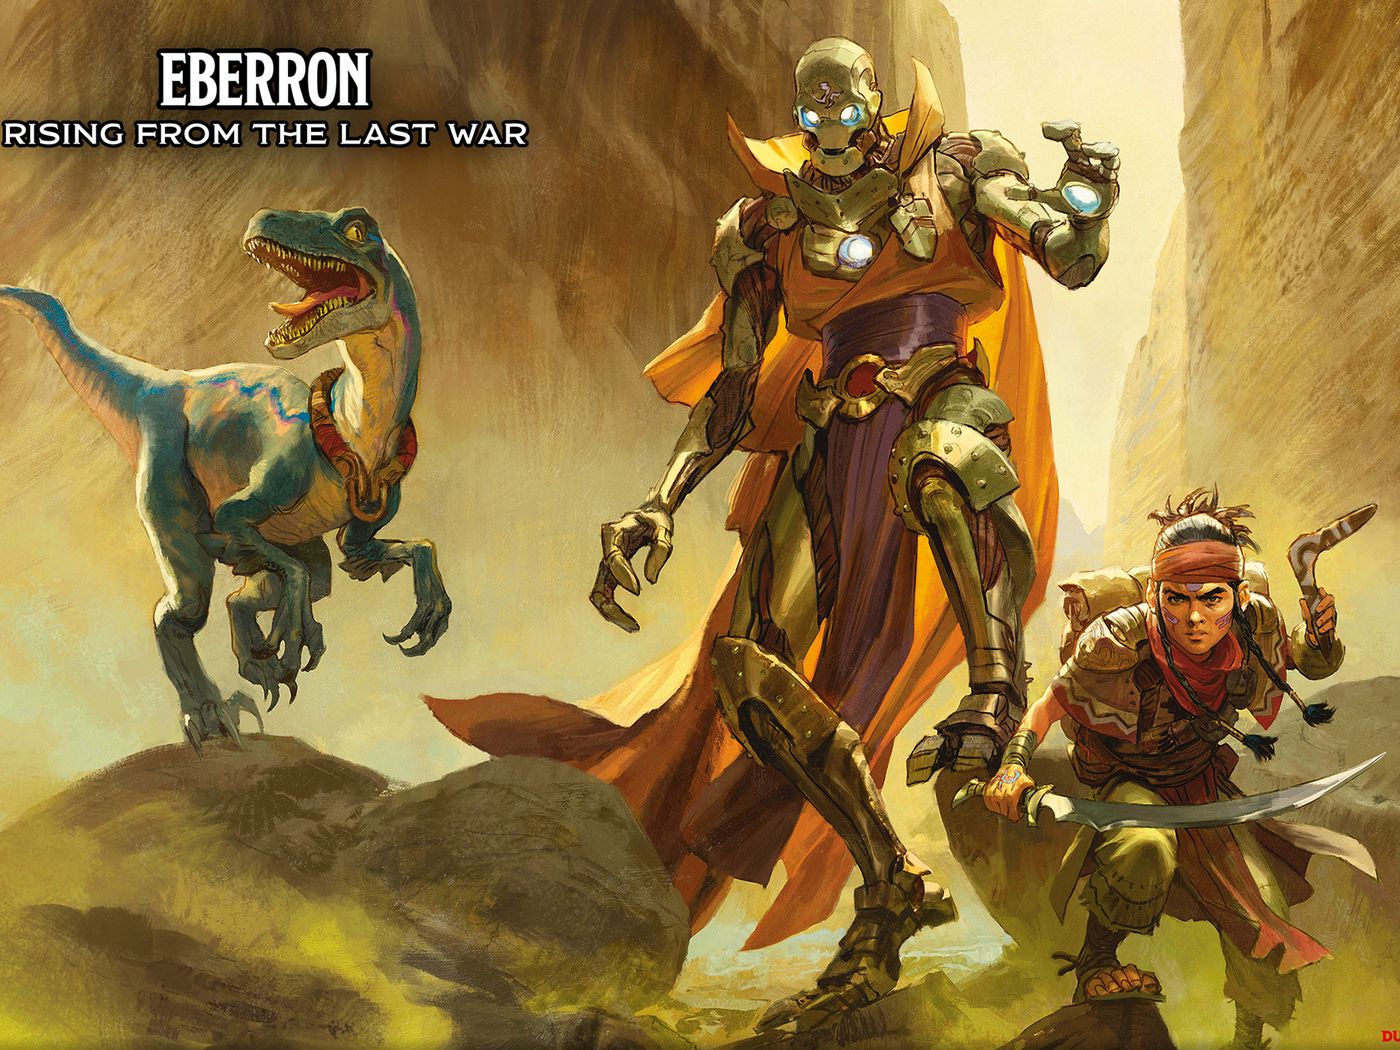 D&D's first new character class in 5 years could cause nightmares for DMs